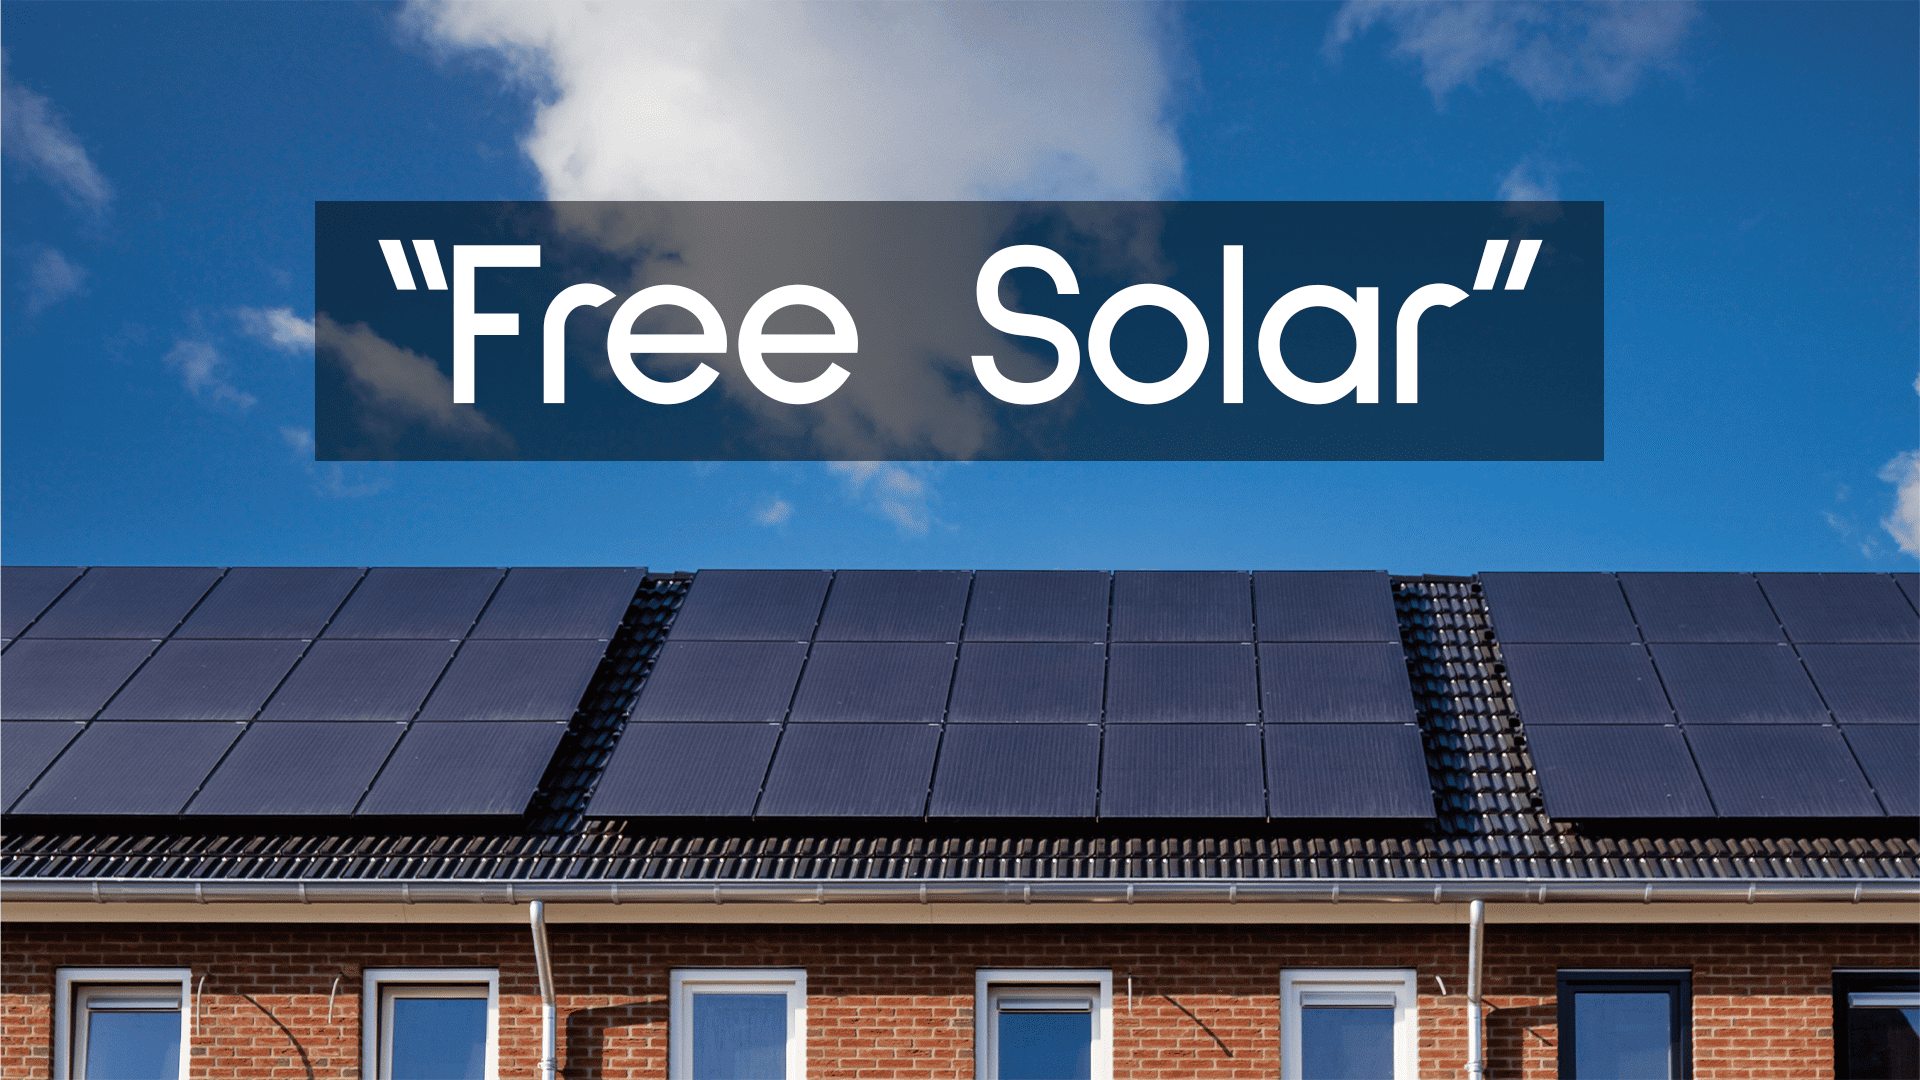 The deceptive promise of "free solar" has ensnared many, here is what you need to know.